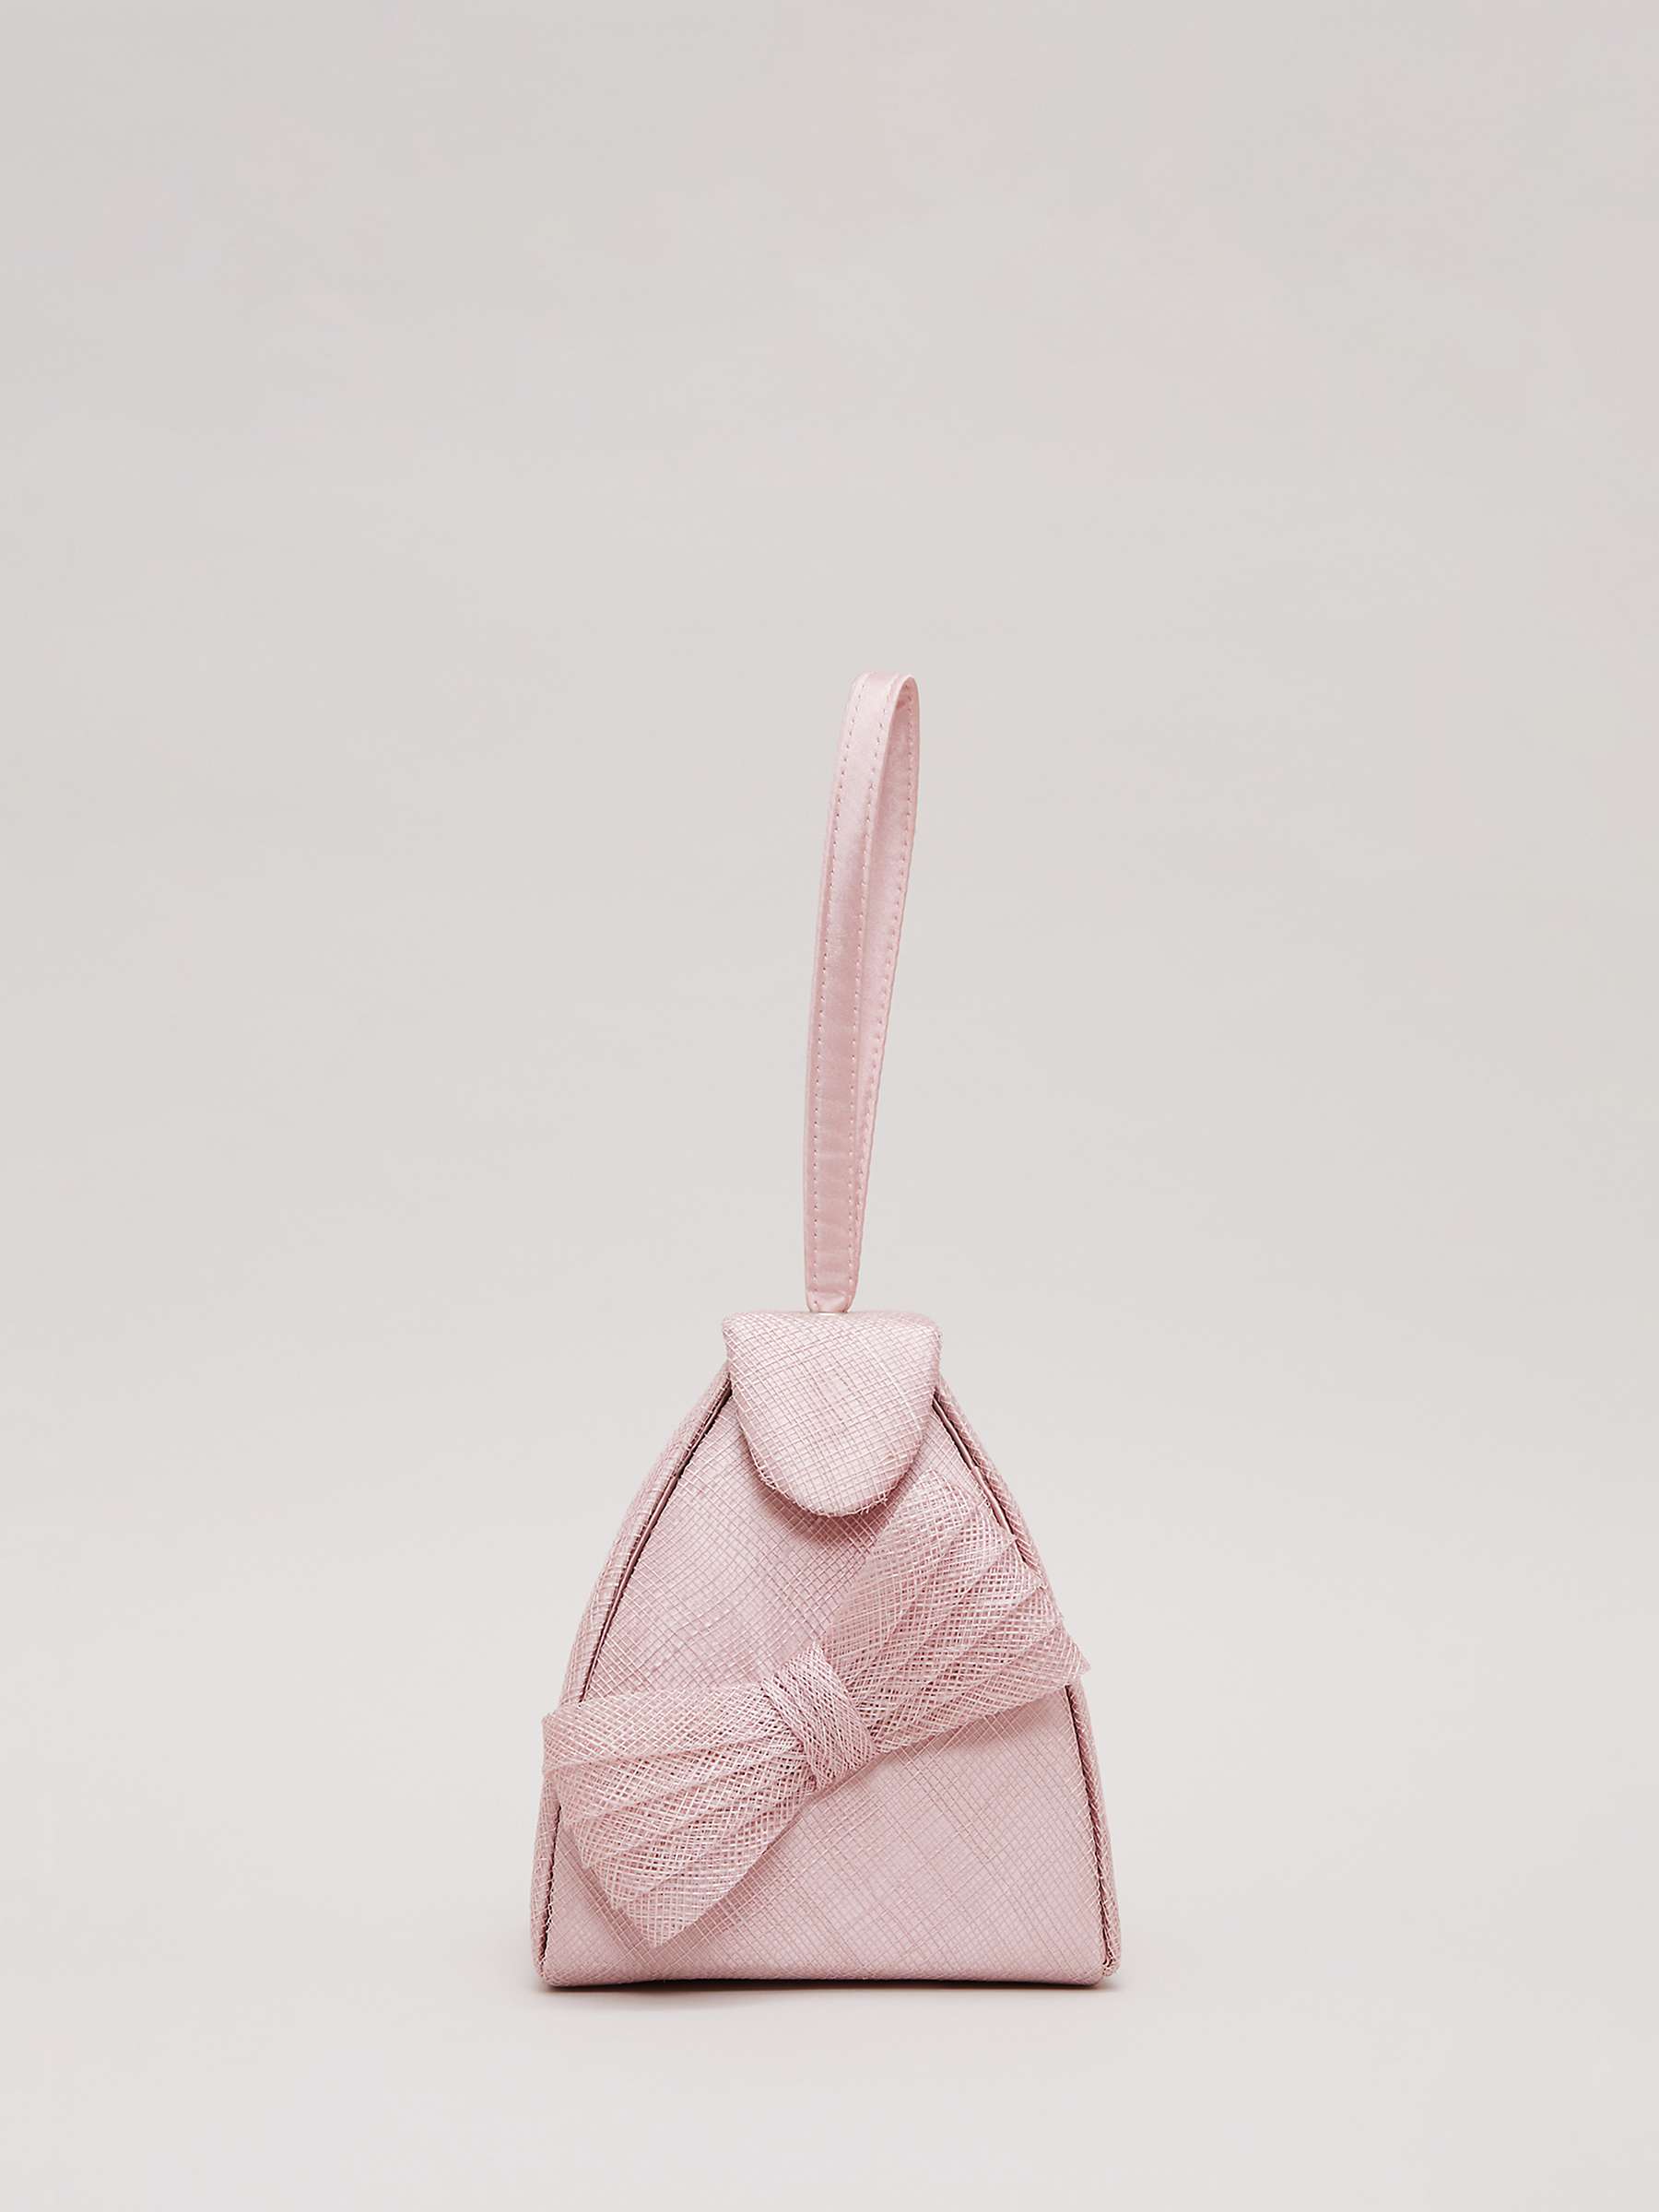 Buy Phase Eight Bow Front Top Handle Handbag, Pale Pink Online at johnlewis.com